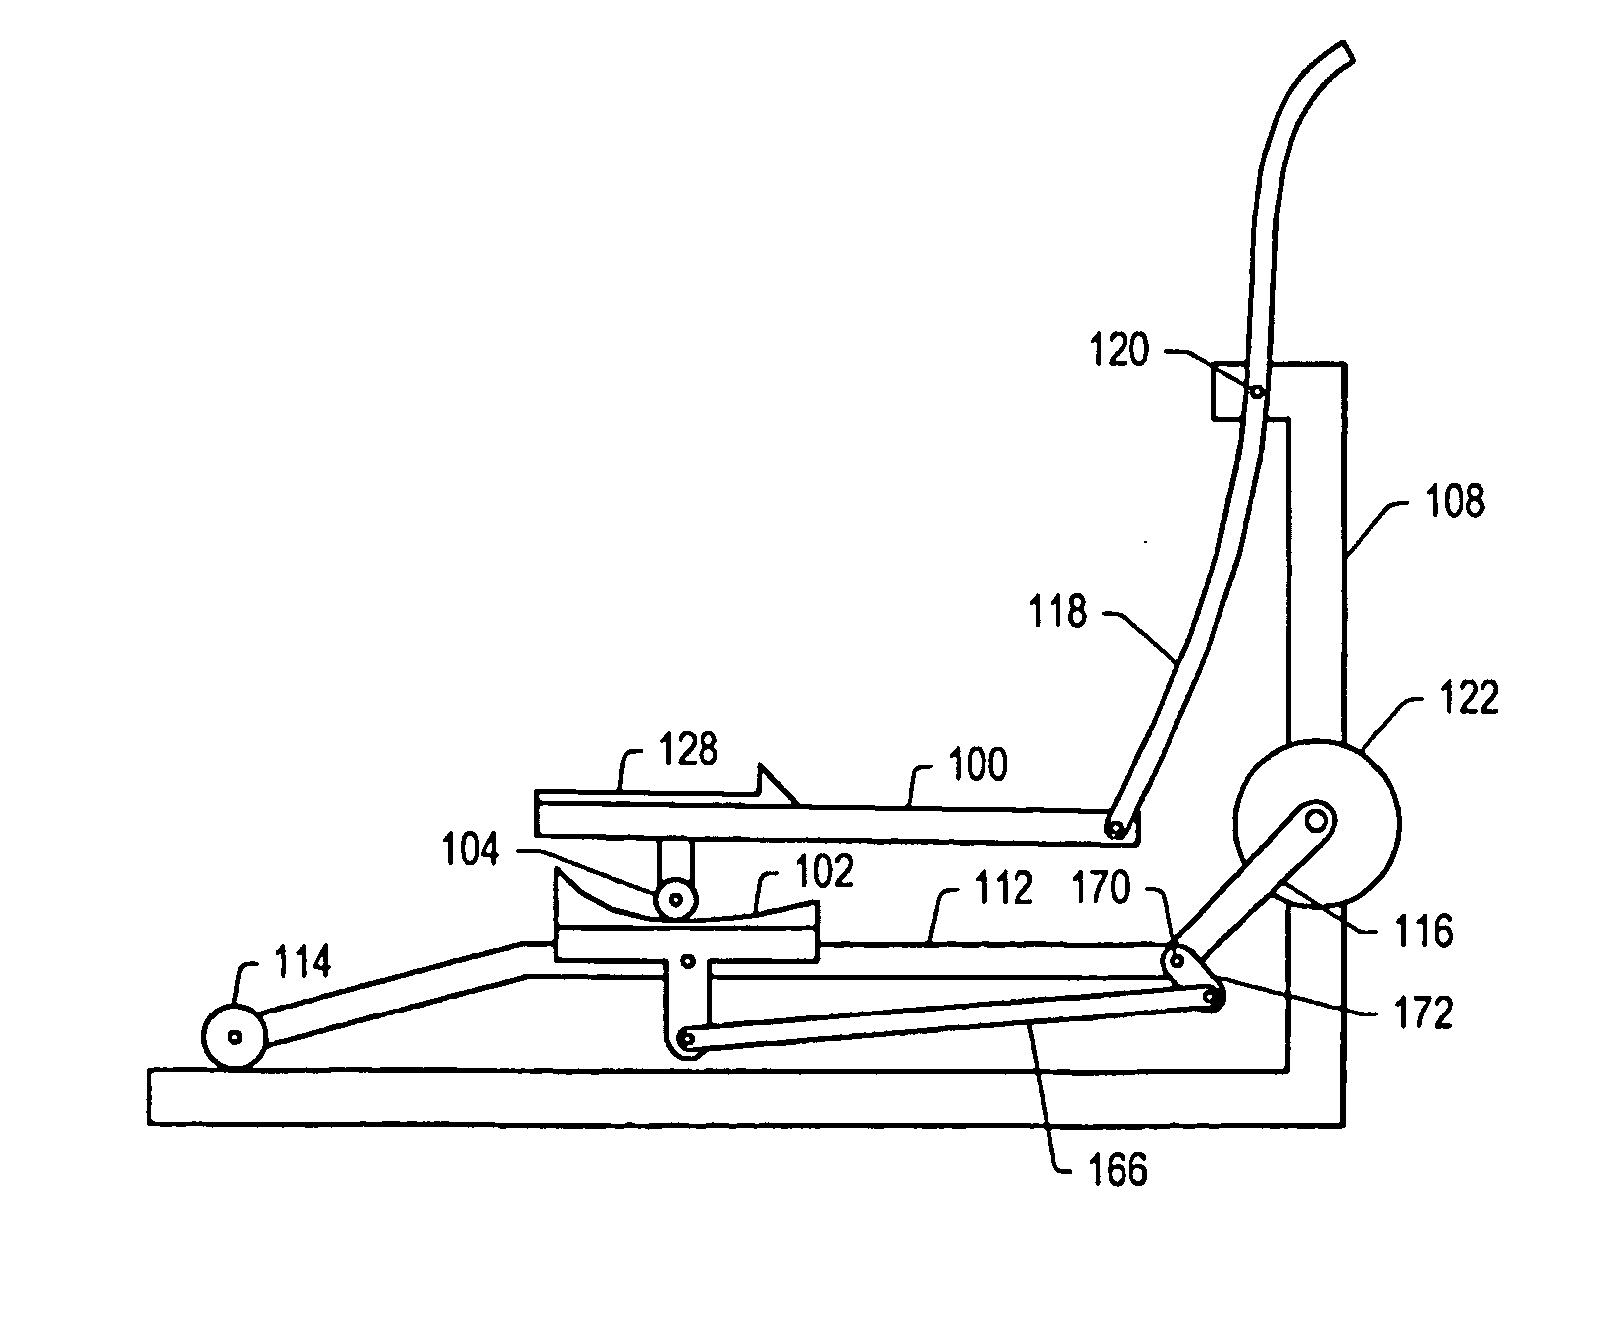 Variable stride exercise device using spring damper assembly